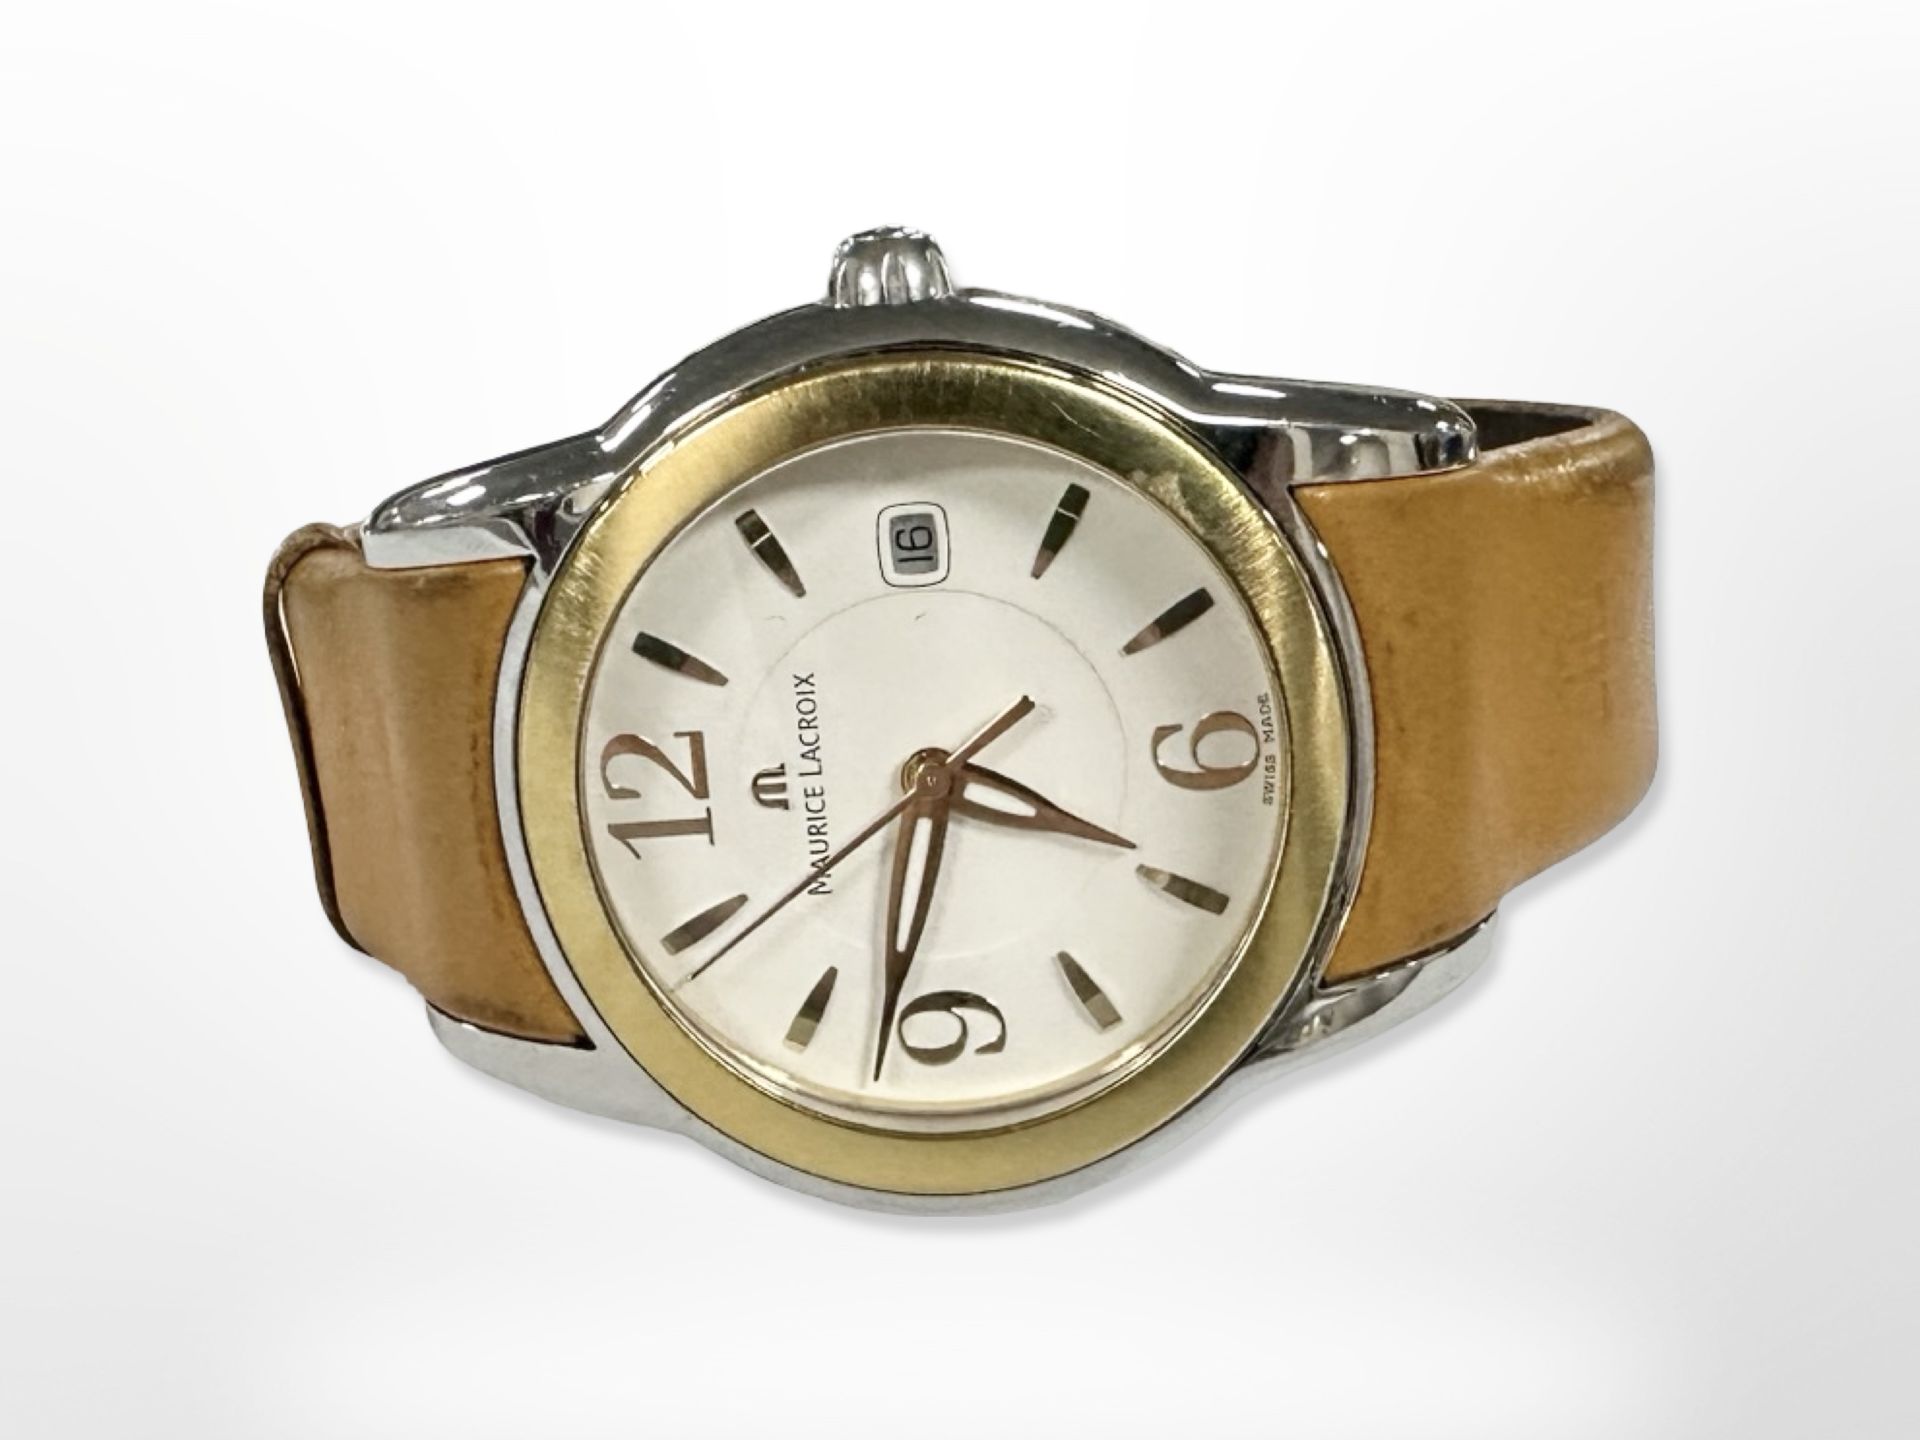 A Gent's Maurice Lacroix wriswatch on tan leather strap